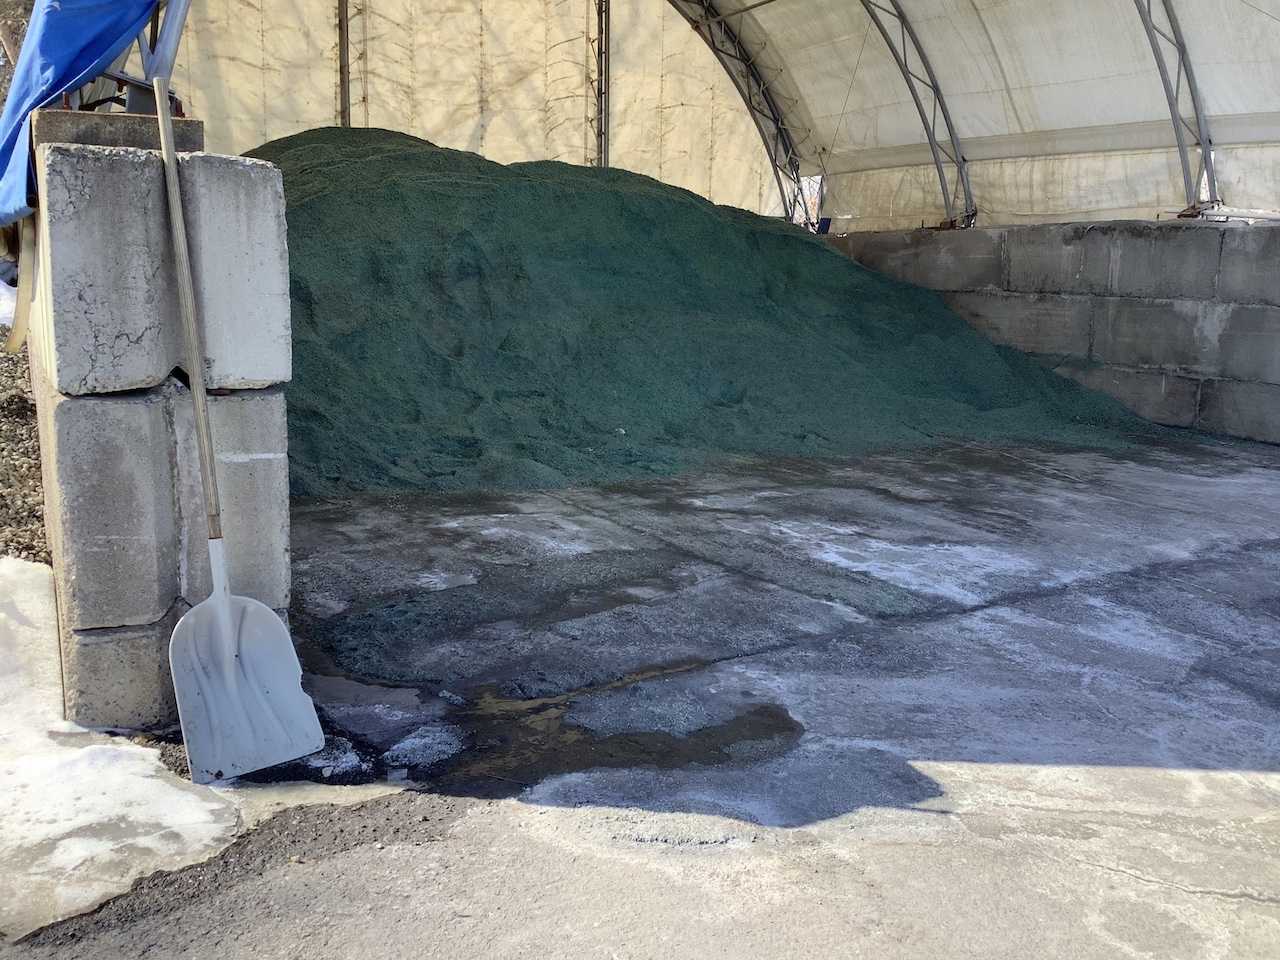 A mound of greenish salt with a shovel in front of it